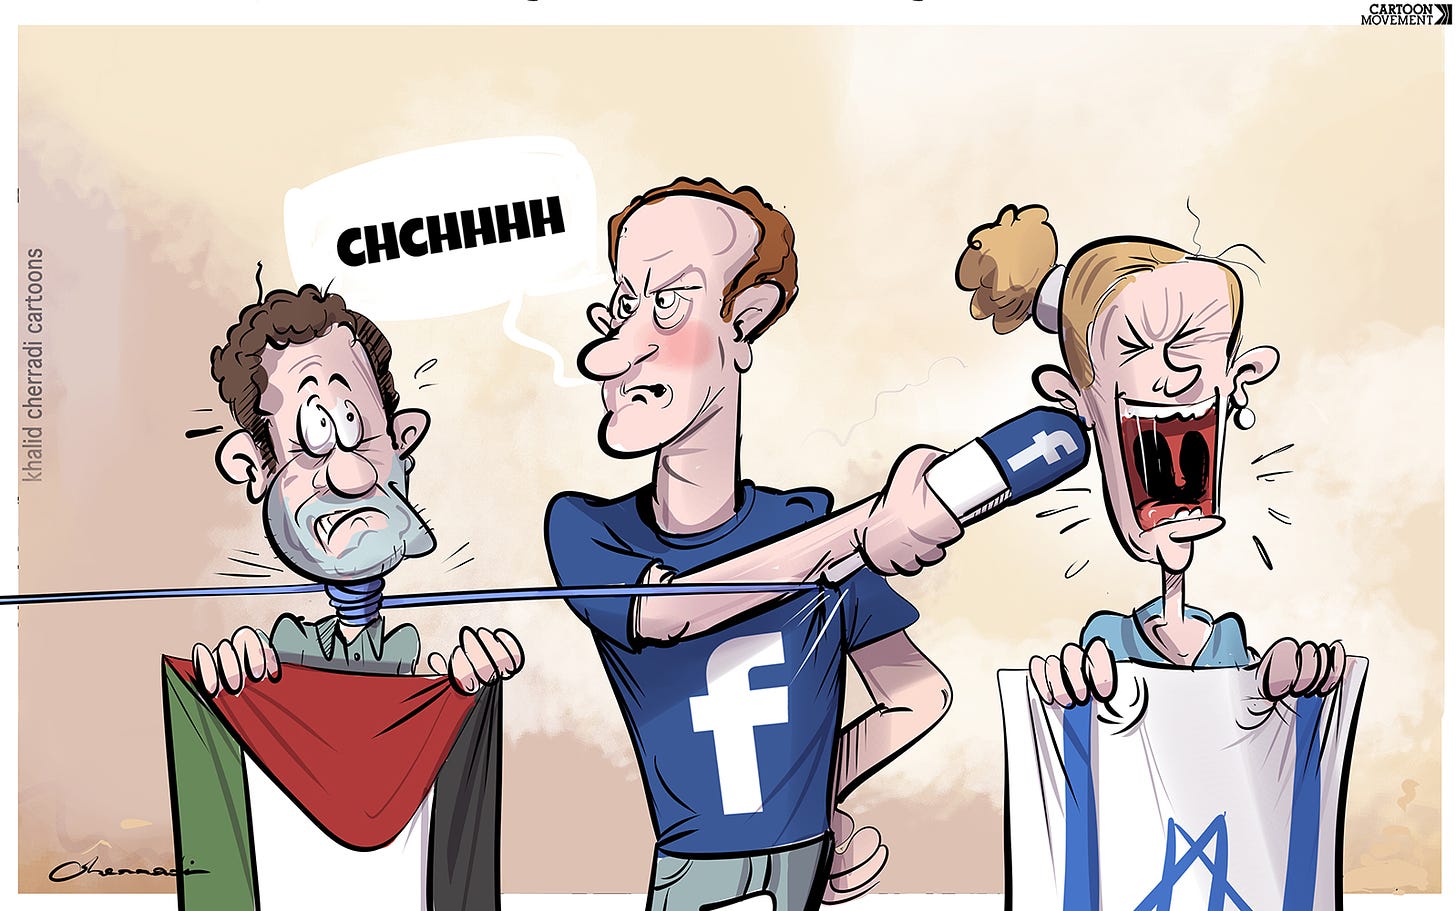 Cartoon showing Mark Zuckerberg holding the microphone with a Facebook logo to a person with a shirt with the Israeli flag on it. Meanwhile, the microphone cord is strangling a person wearing a shirt with the Palestinian flag on it who is standing on the other side of Zuckerberg.